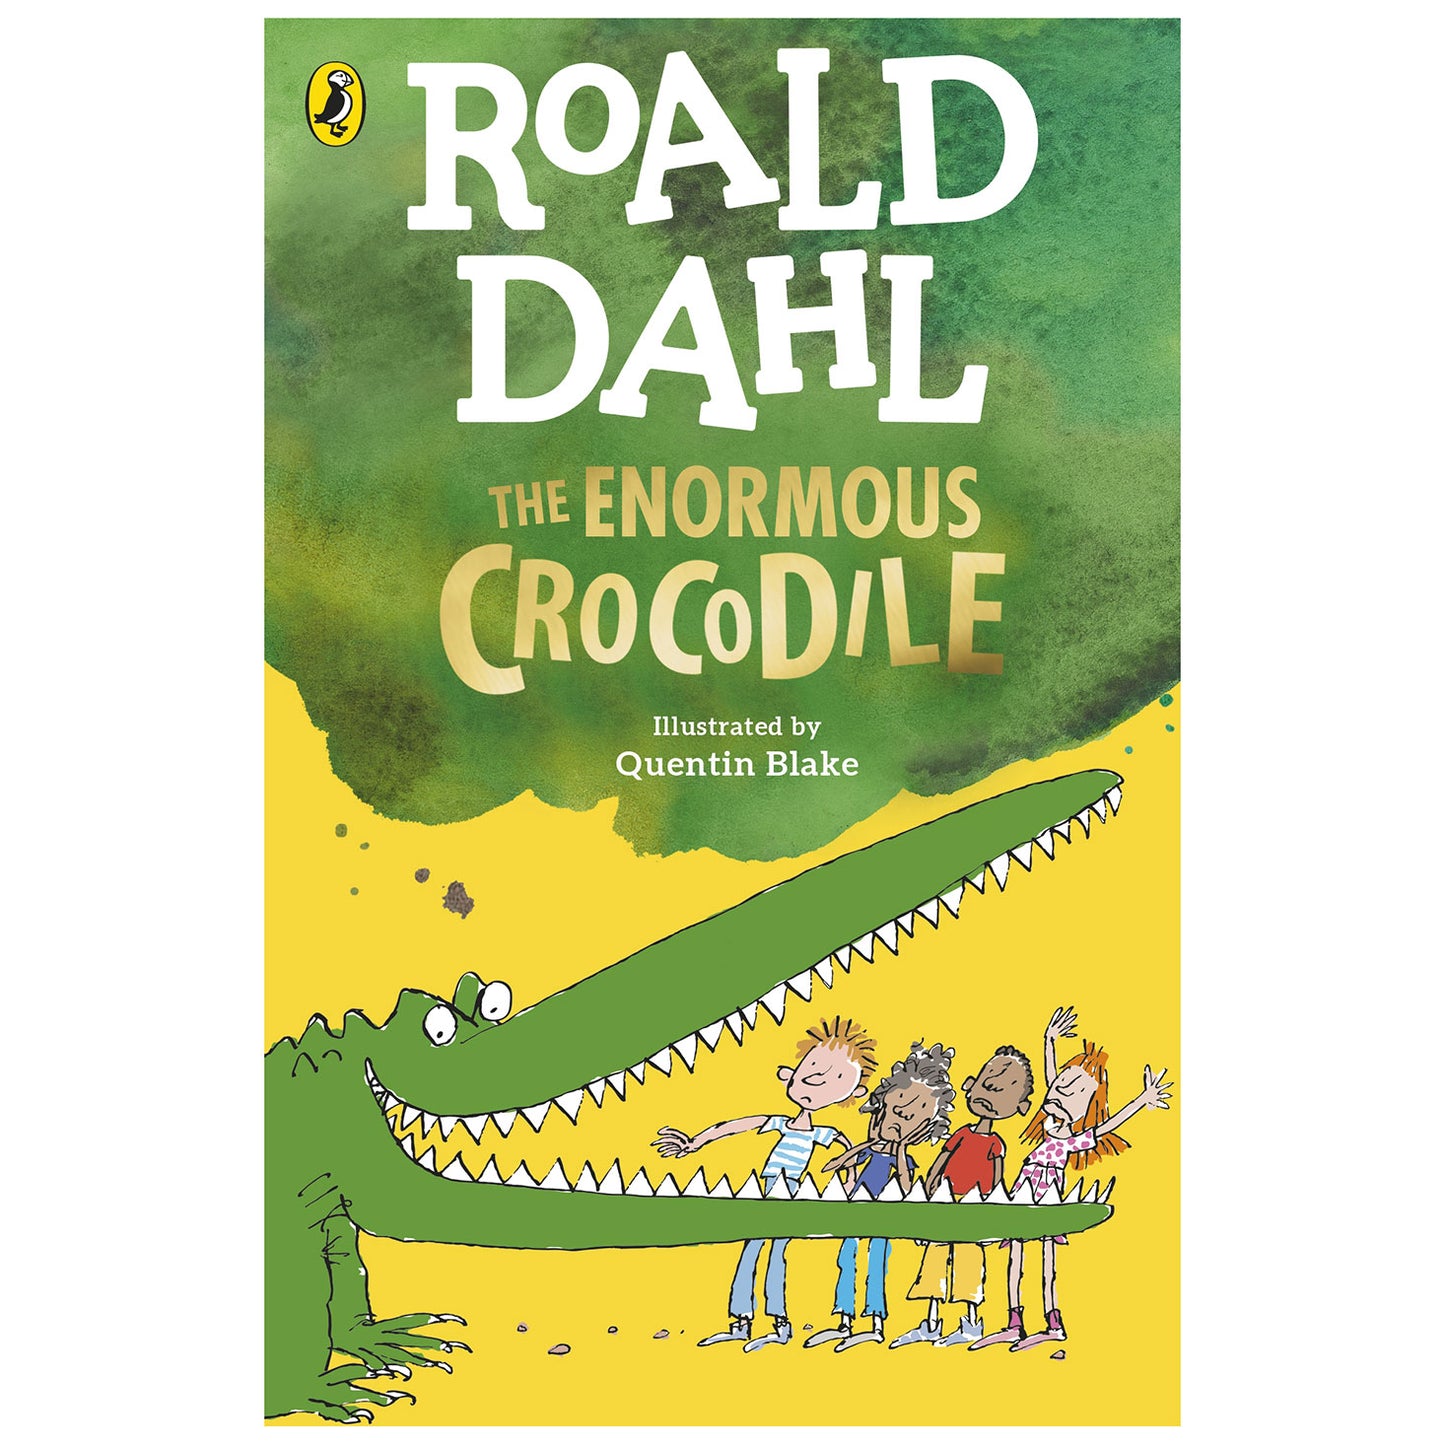 Roald Dahl's The Enormous Crocodile with illustrations by Quentin Blake